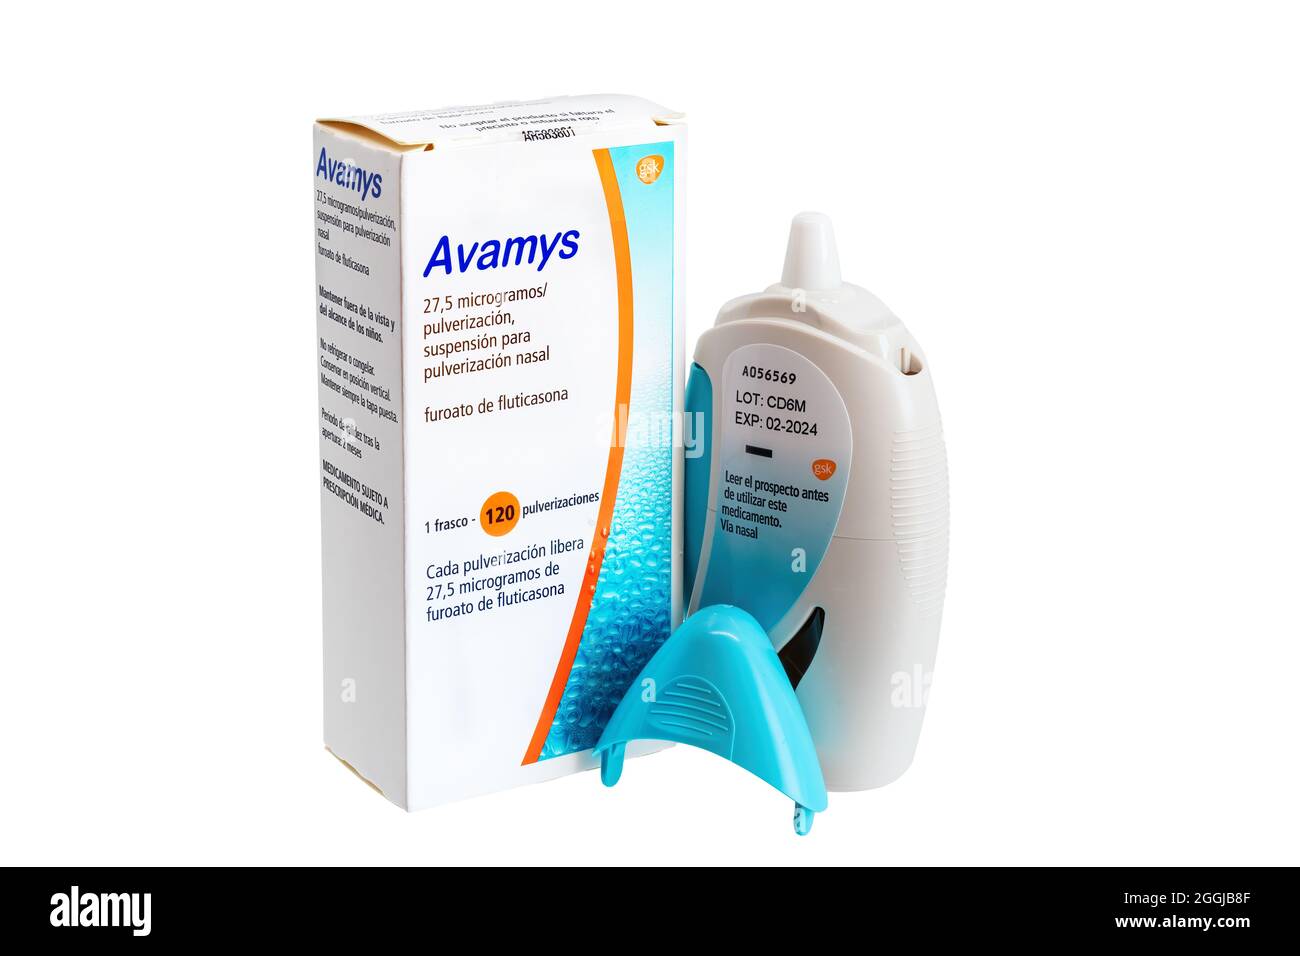 Huelva, Spain - August 28, 2021: Spanish box of fluticasone furoate brand Avamys. It is a steroid nasal spray for cold-like symptoms caused by allergi Stock Photo